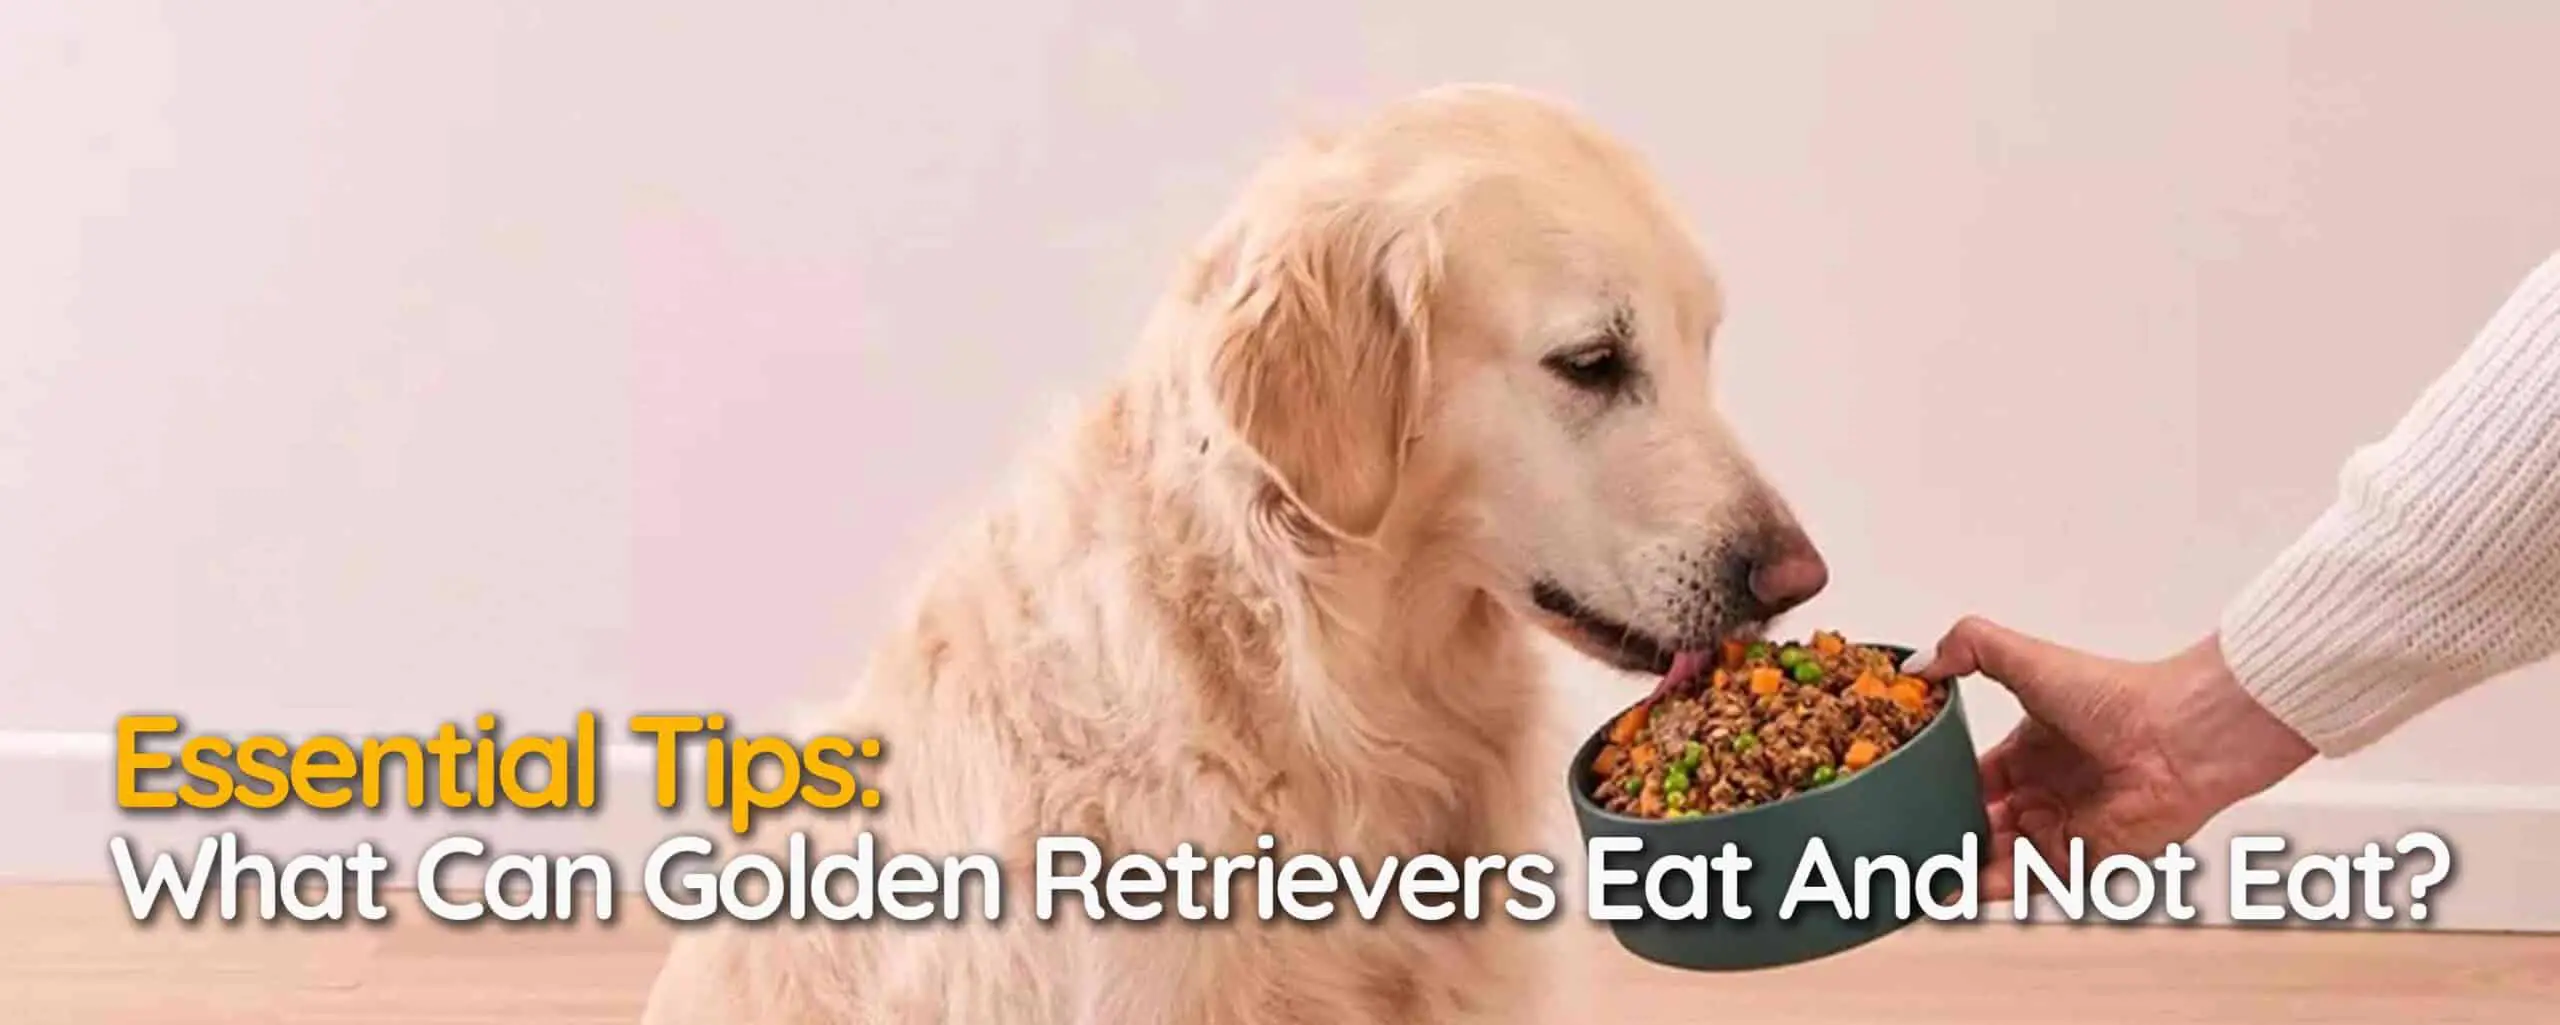 Essential Tips: What Can Golden Retrievers Eat And Not Eat?